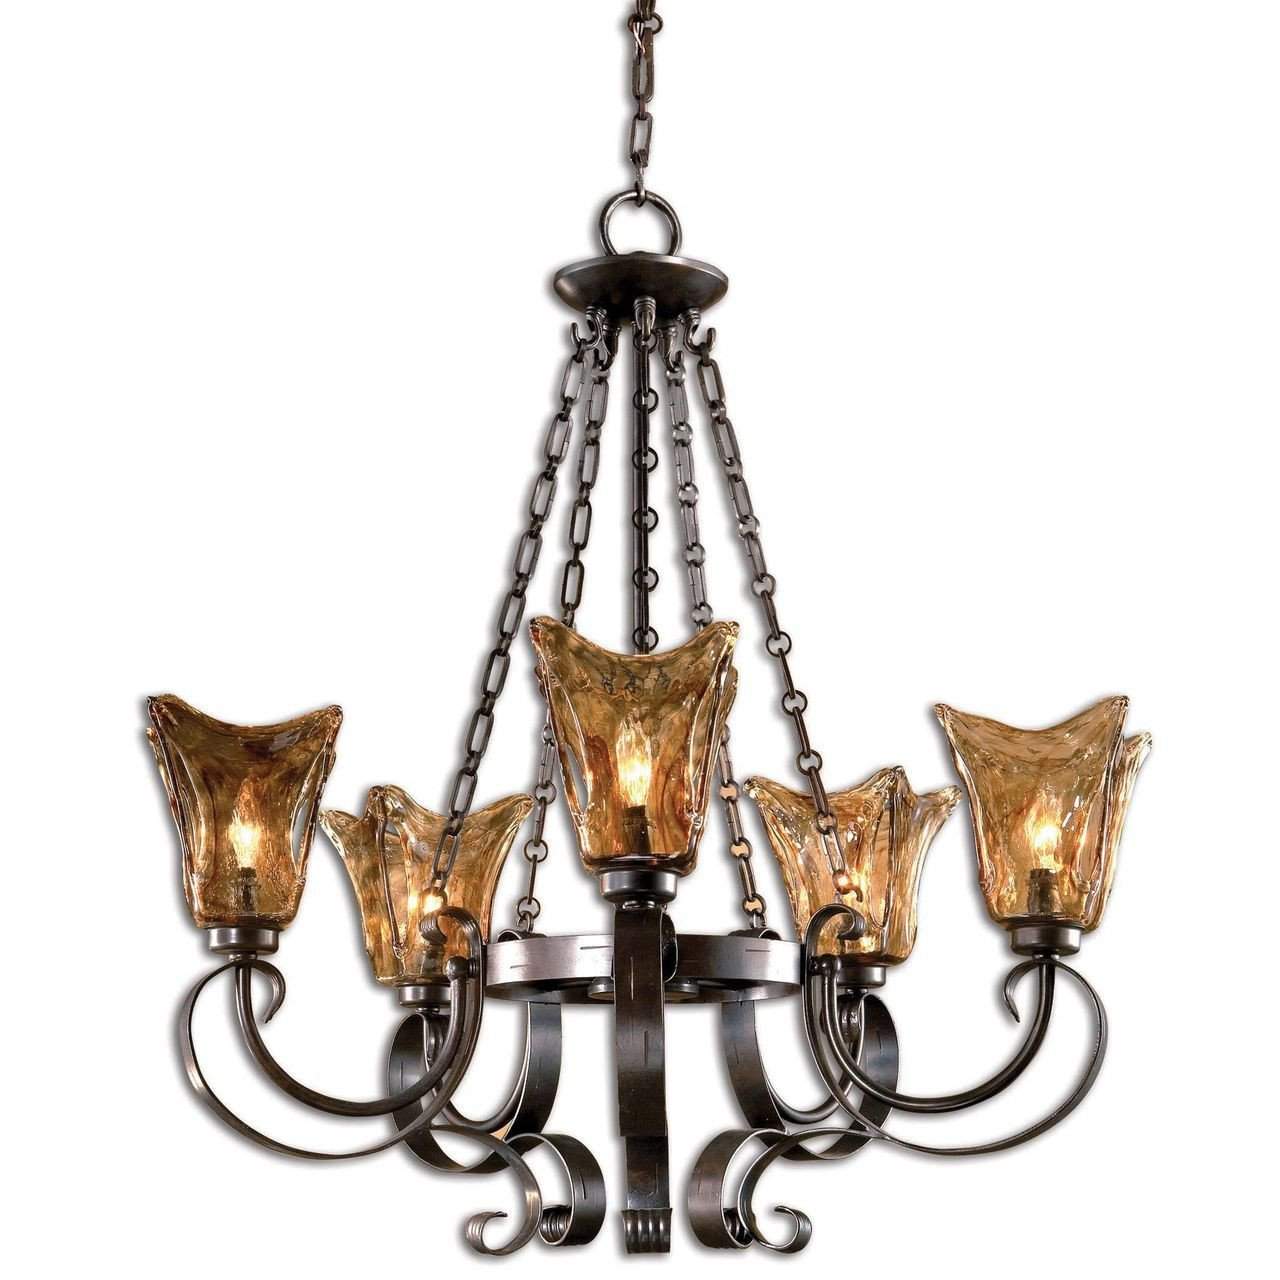 UtterMost New Product  Uttermost Vetraio 5Lt Oil Rubbed Bronze Chandelier Sold by VaasuHomes